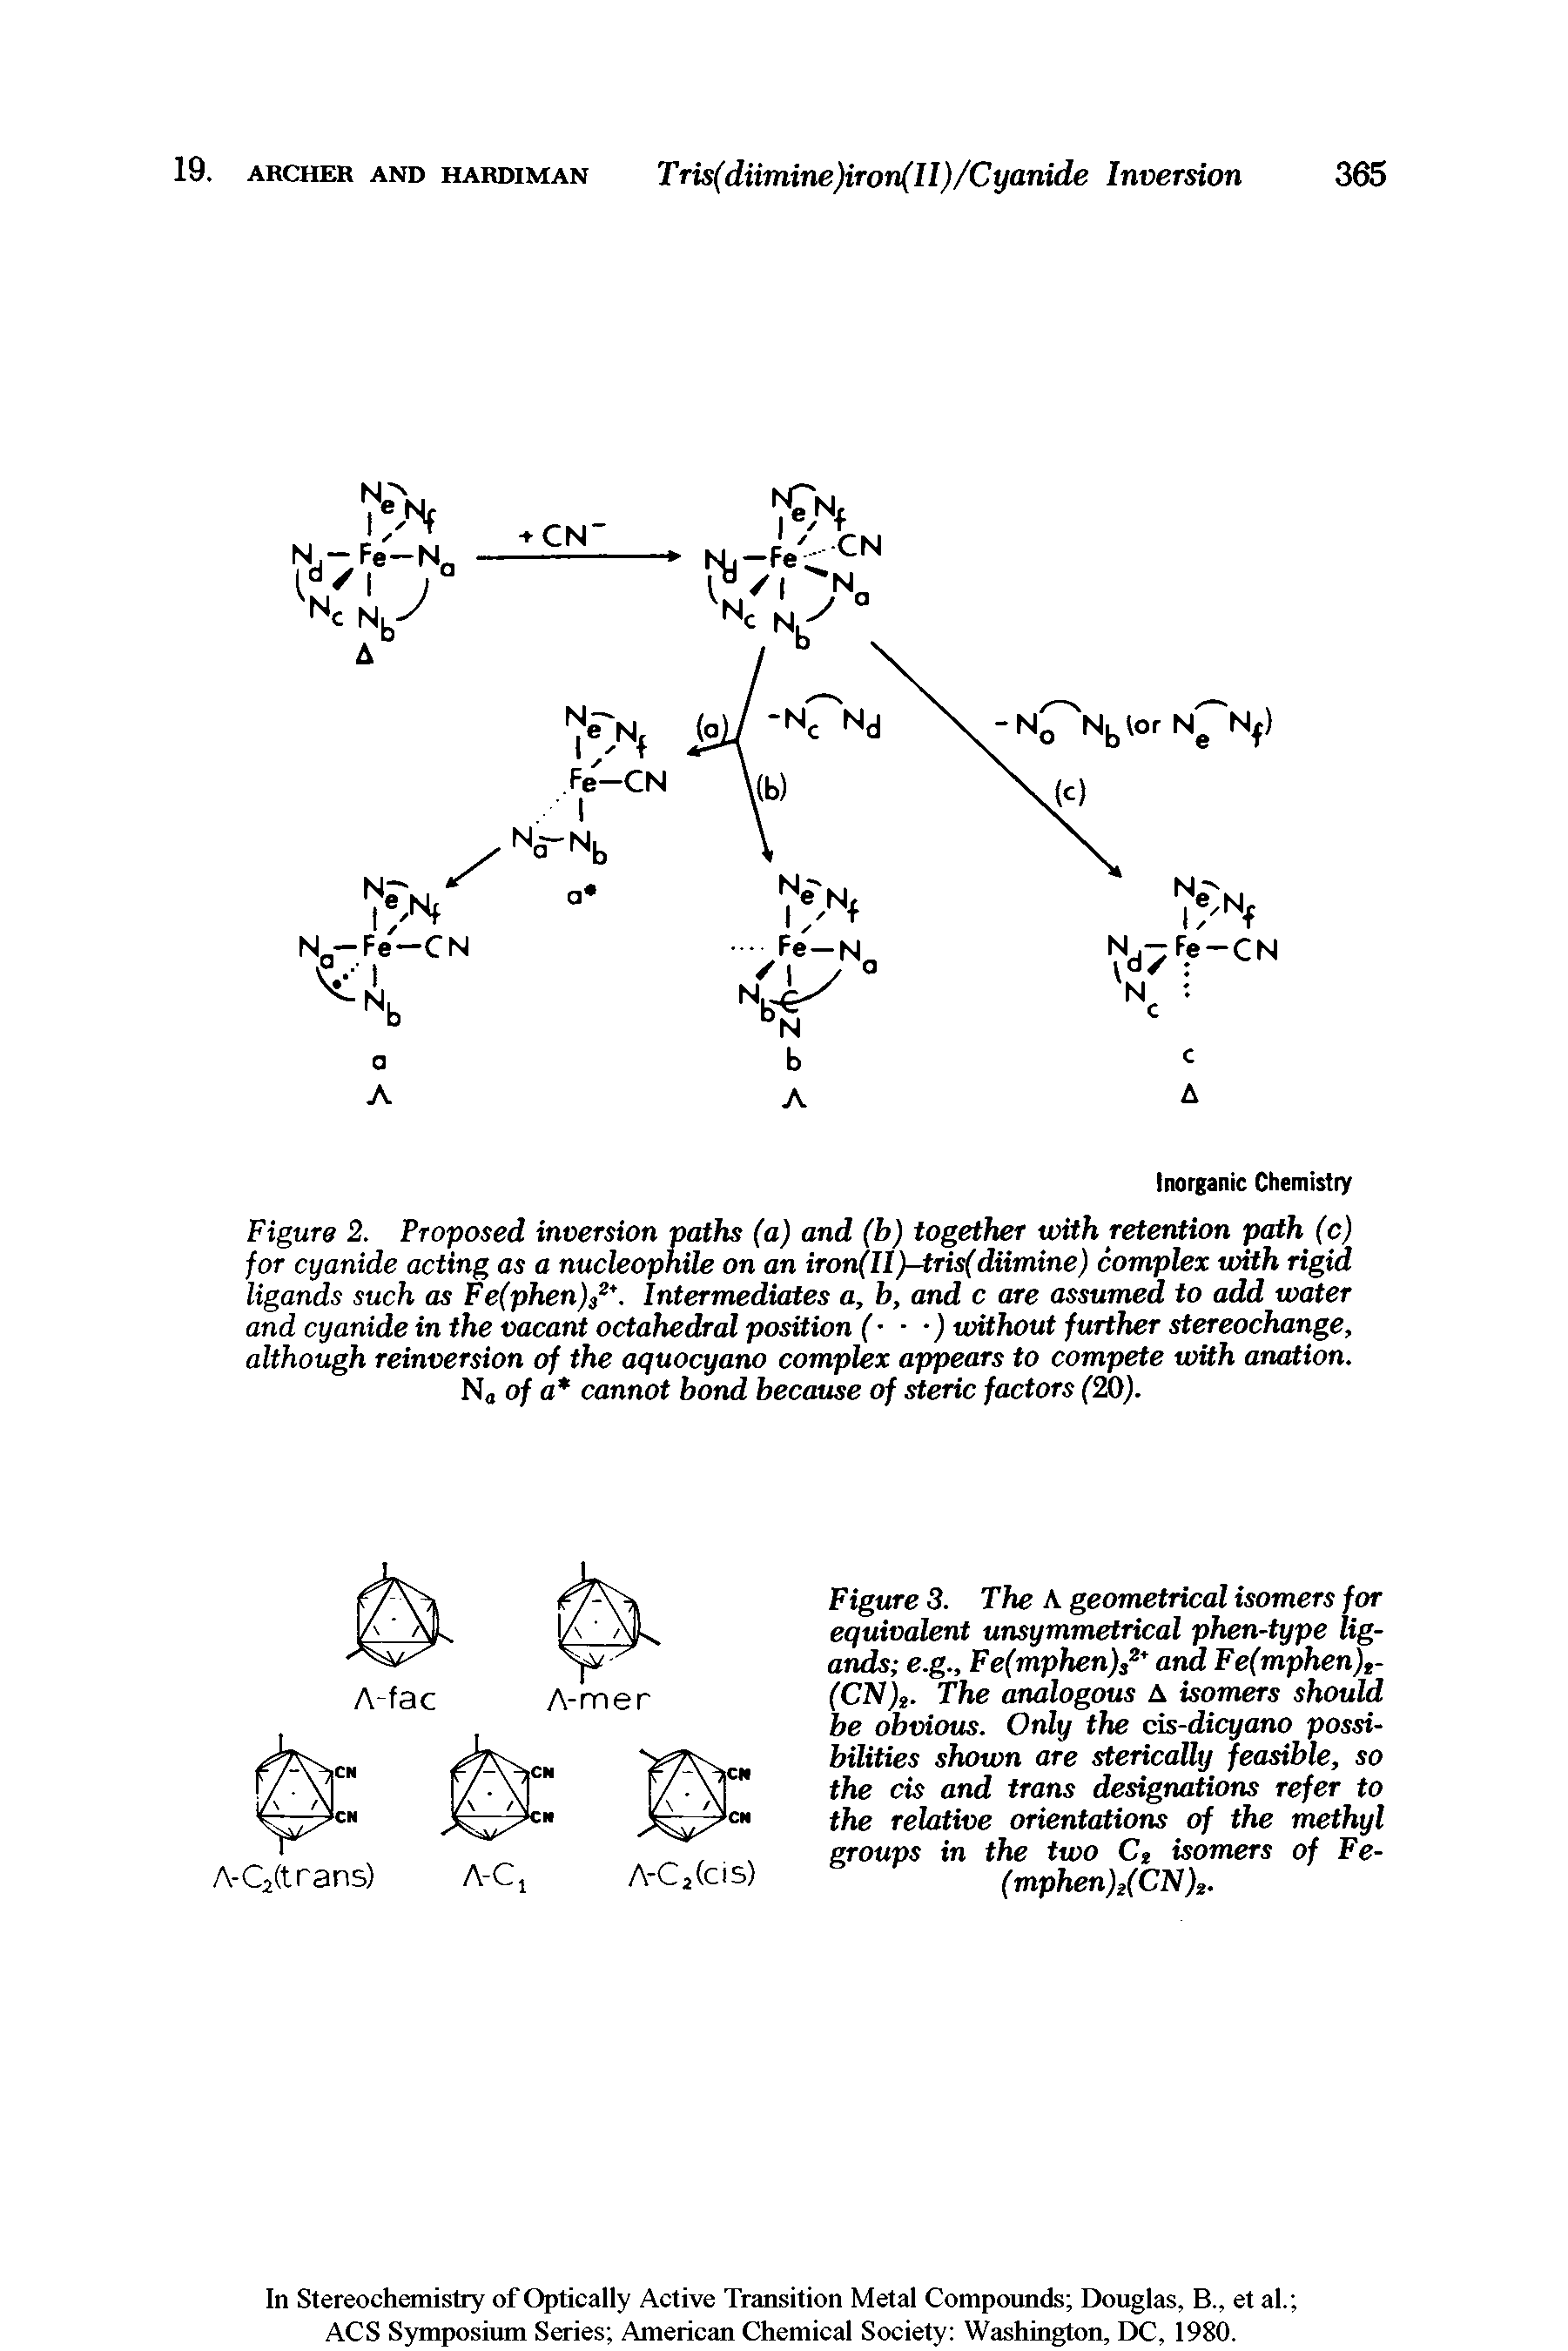 Figure 2. Proposed inversion paths (a) and (b) together with retention path (c) for cyanide acting as a nucleophile on an iron(Il)-tris(diimine) complex with rigid ligands such as Fe(phen)32 Intermediates a, b, and c are assumed to add water and cyanide in the vacant octahedral position ( ) without further stereochange, although reinversion of the aquocyano complex appears to compete with anation. Na of a cannot bond because of steric factors (20).